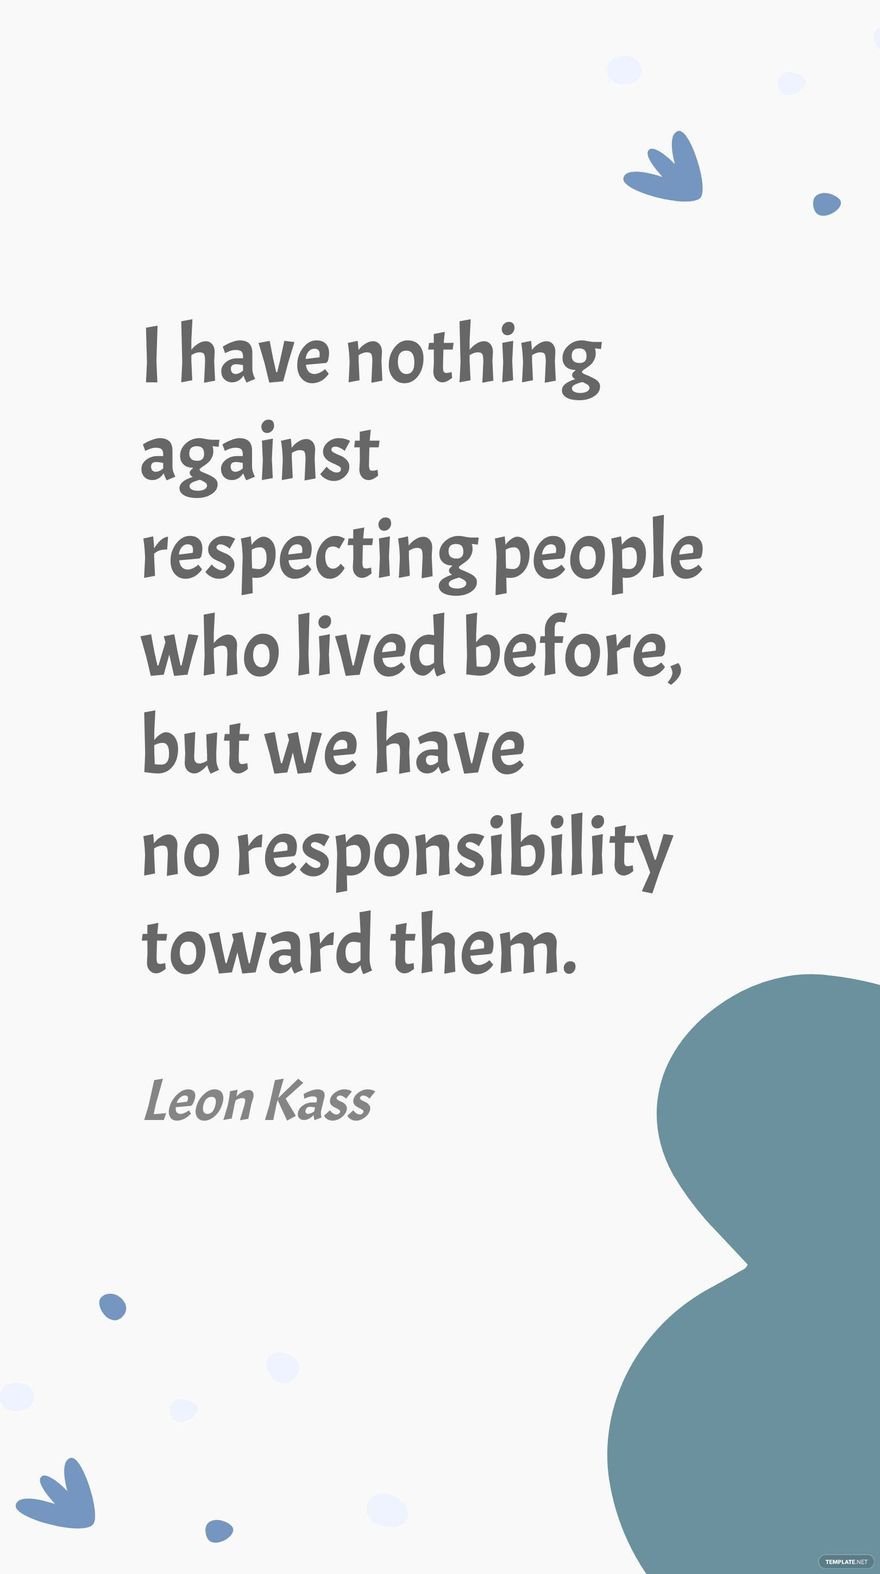 Free Leon Kass- I have nothing against respecting people who lived before, but we have no responsibility toward them. in JPG